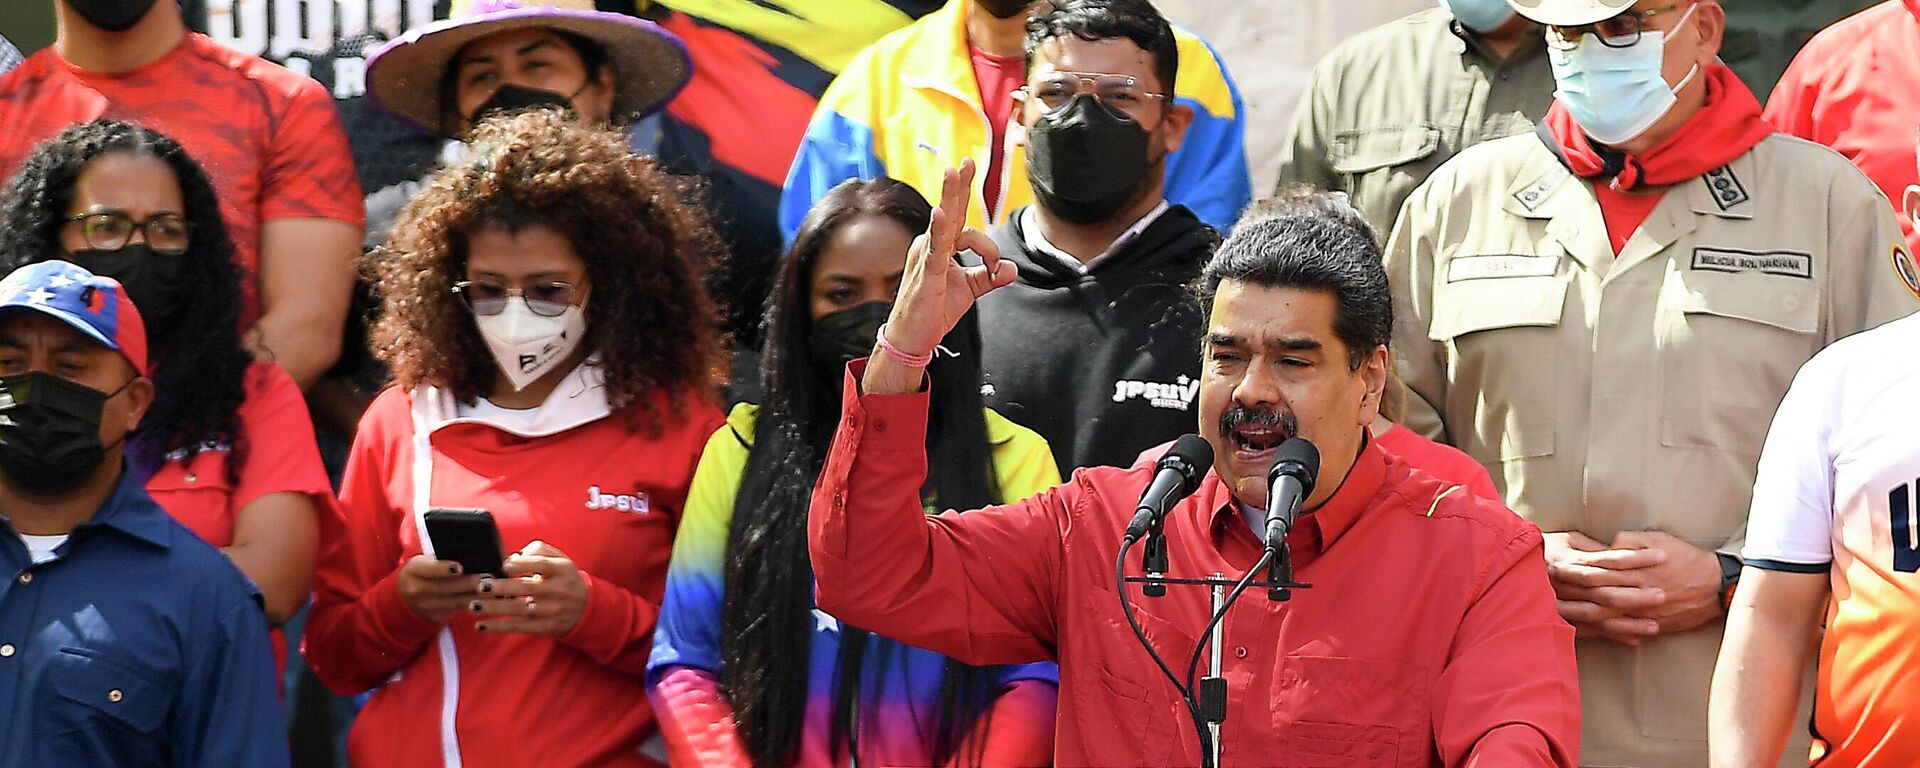 Venezuela's President Nicolas Maduro gives a speech commemorating the 20th anniversary of Hugo Chavez's return to power after a failed coup in 2002, in Caracas, Venezuela, Wednesday, April 13, 2022. - Sputnik International, 1920, 21.06.2022